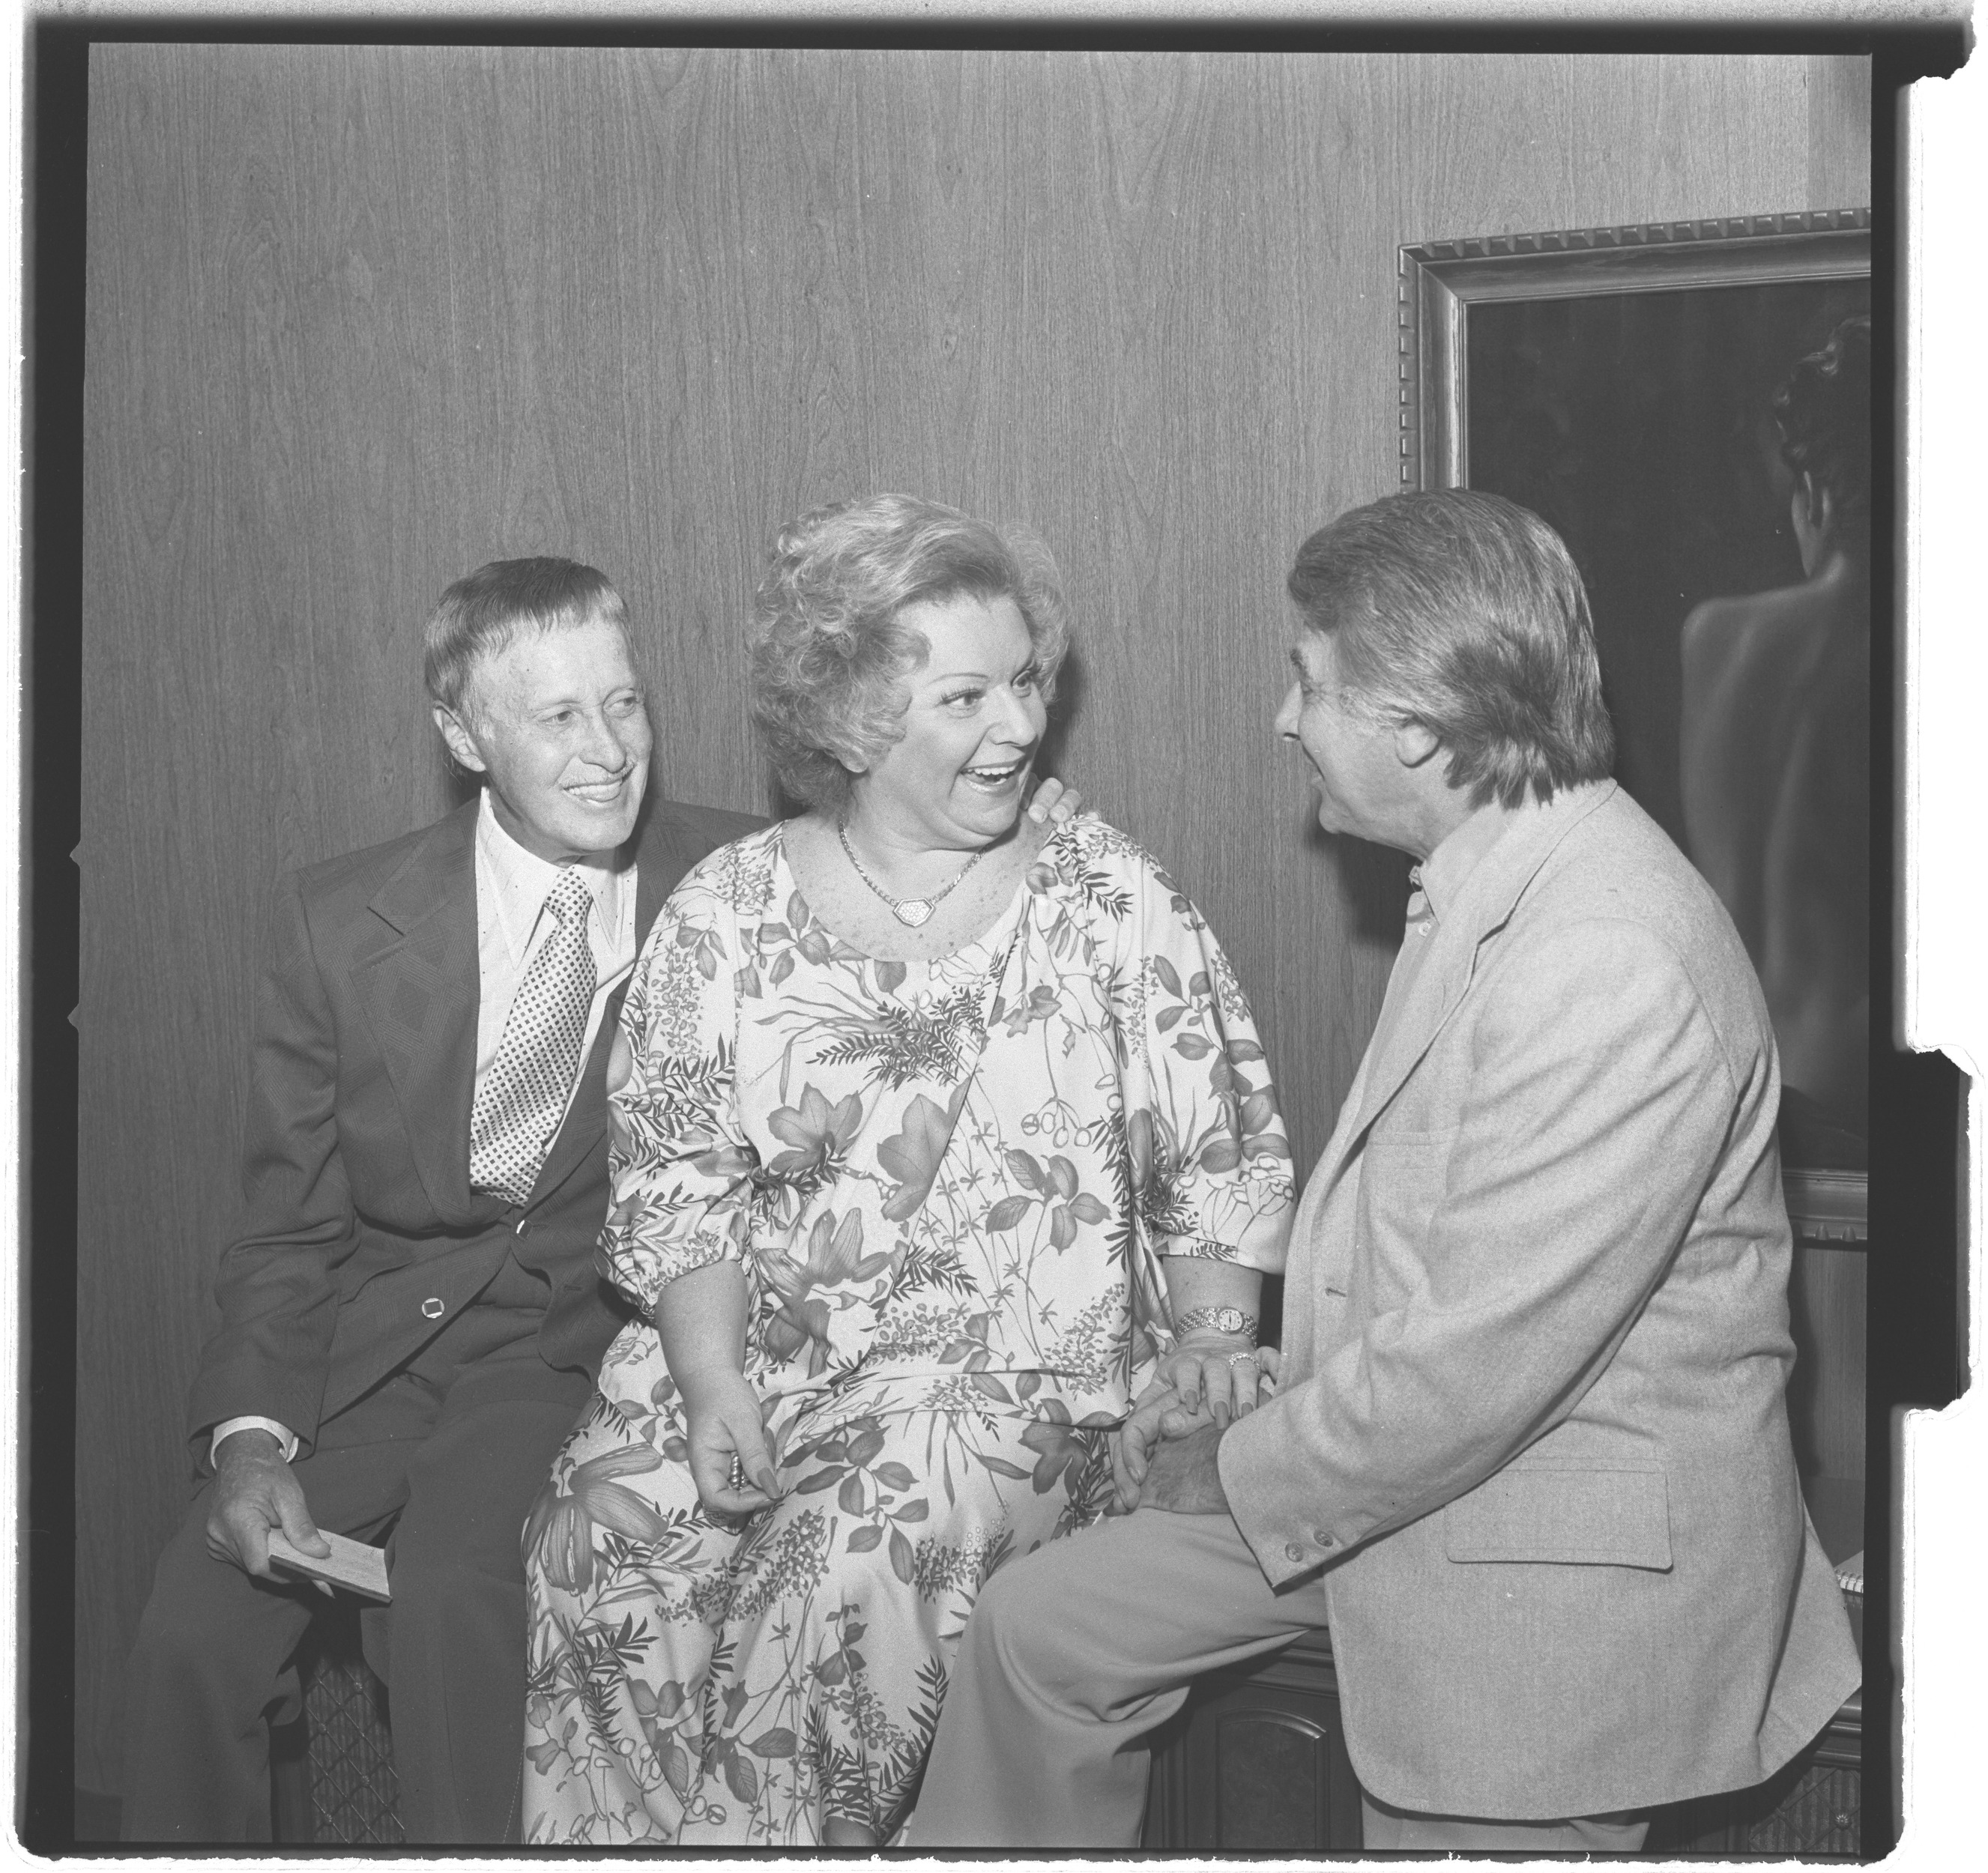 Photographs of Molasky, Susan and Totie Fields, image 03